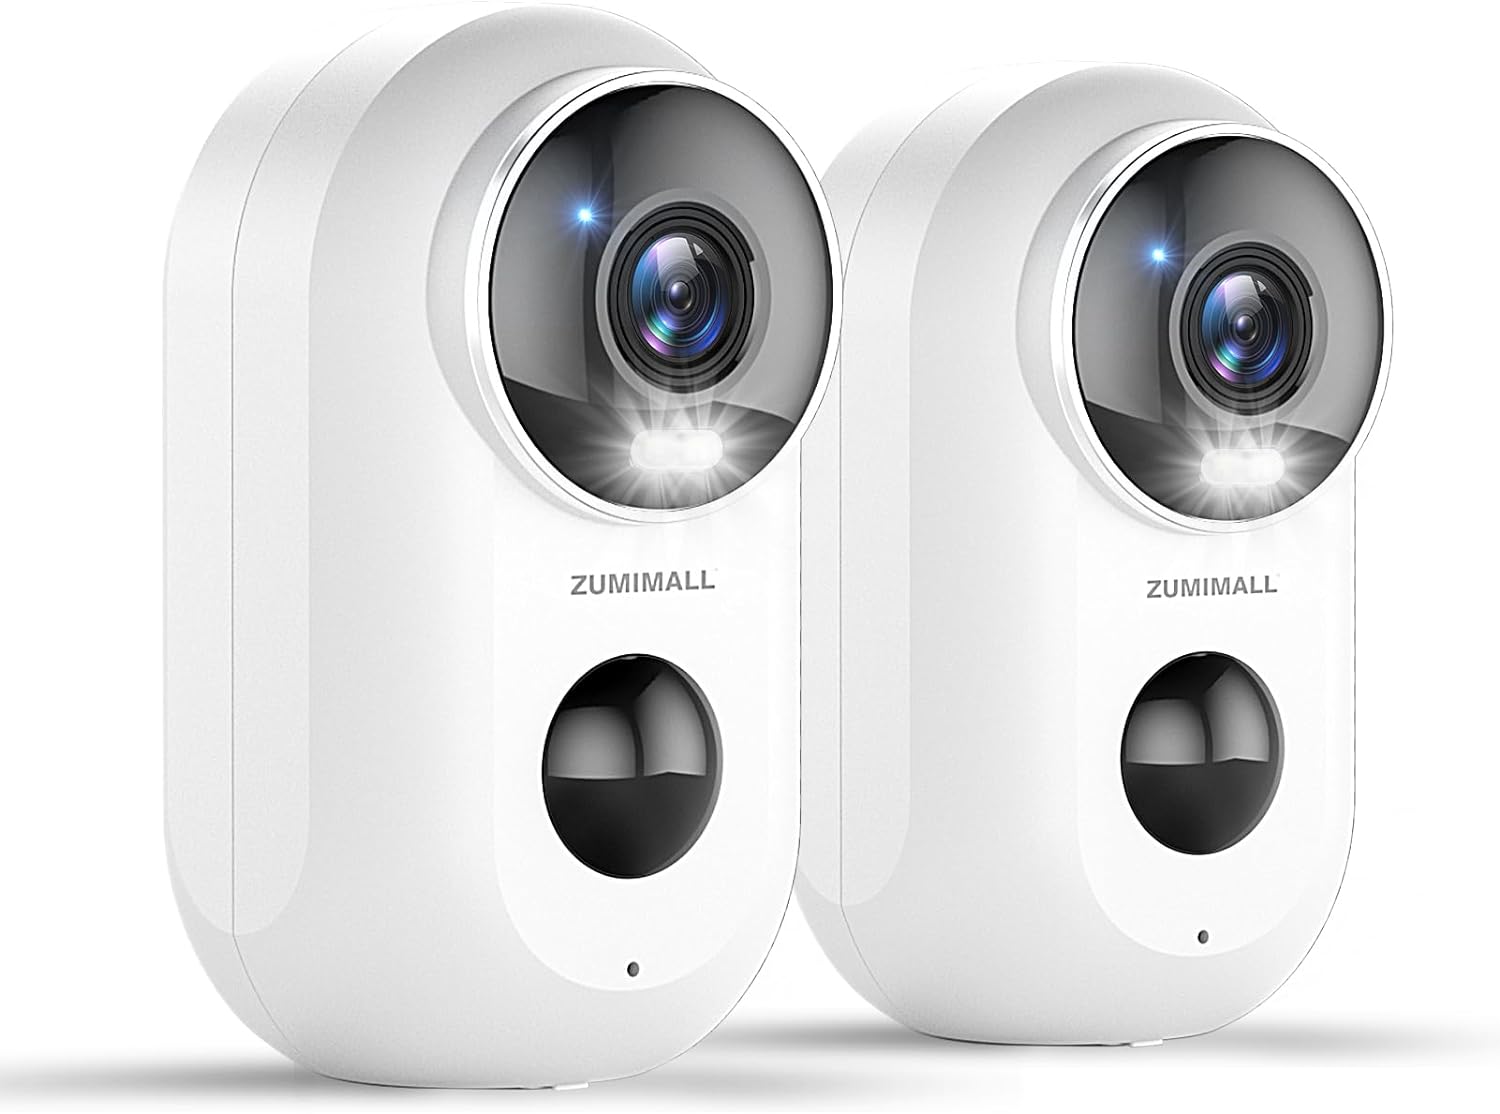 Zumimall F5C White Battery Powered Smart Wi Fi Outdoor Security Camera - $60